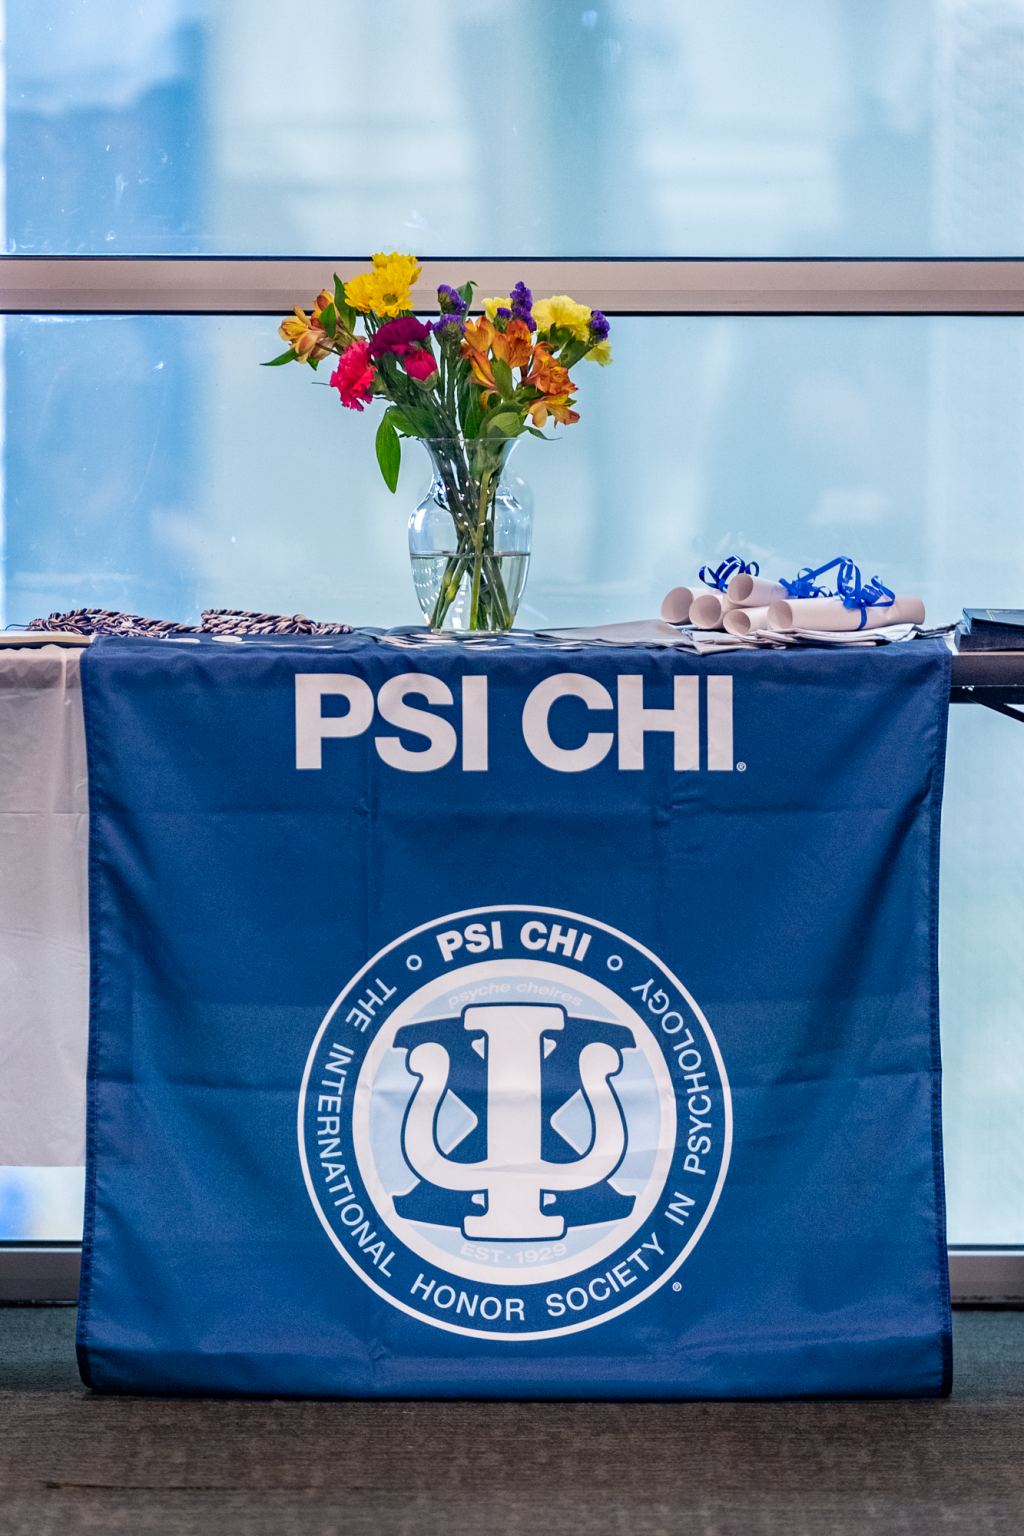 Flowers sit in a vase on a table adorned with the PSI CHI logo 